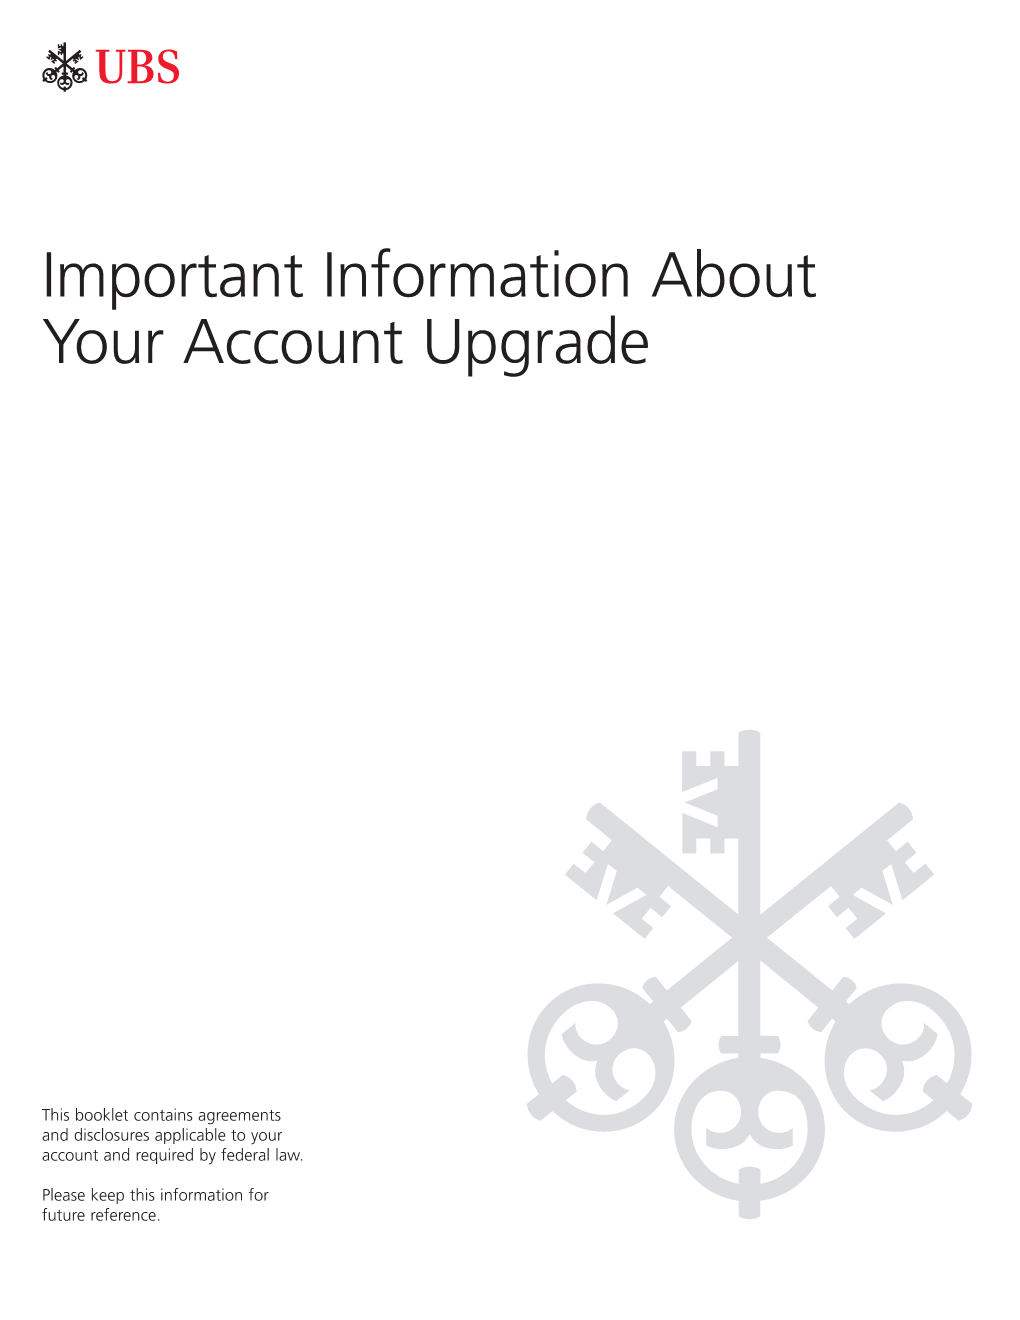 Important Information About Your Account Upgrade